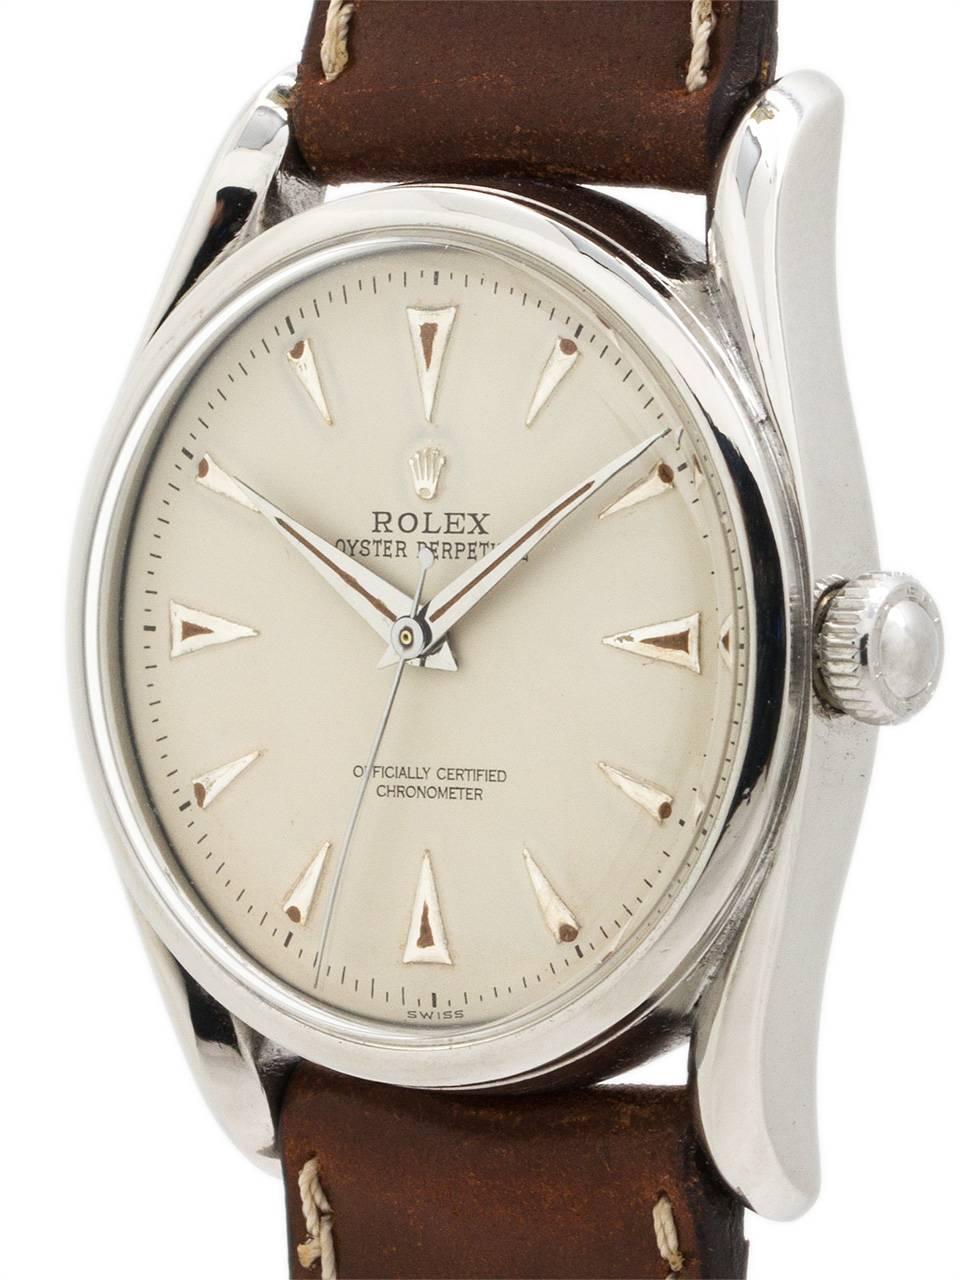 Scarce and desirable model Rolex  stainless steel “Bombe ref 5018 serial # 608,xxx circa 1948. Featuring 35mm diameter Oyster case with extended bowed lugs, smooth bezel, acrylic crystal, and very pleasing refinished antique white dial with raised